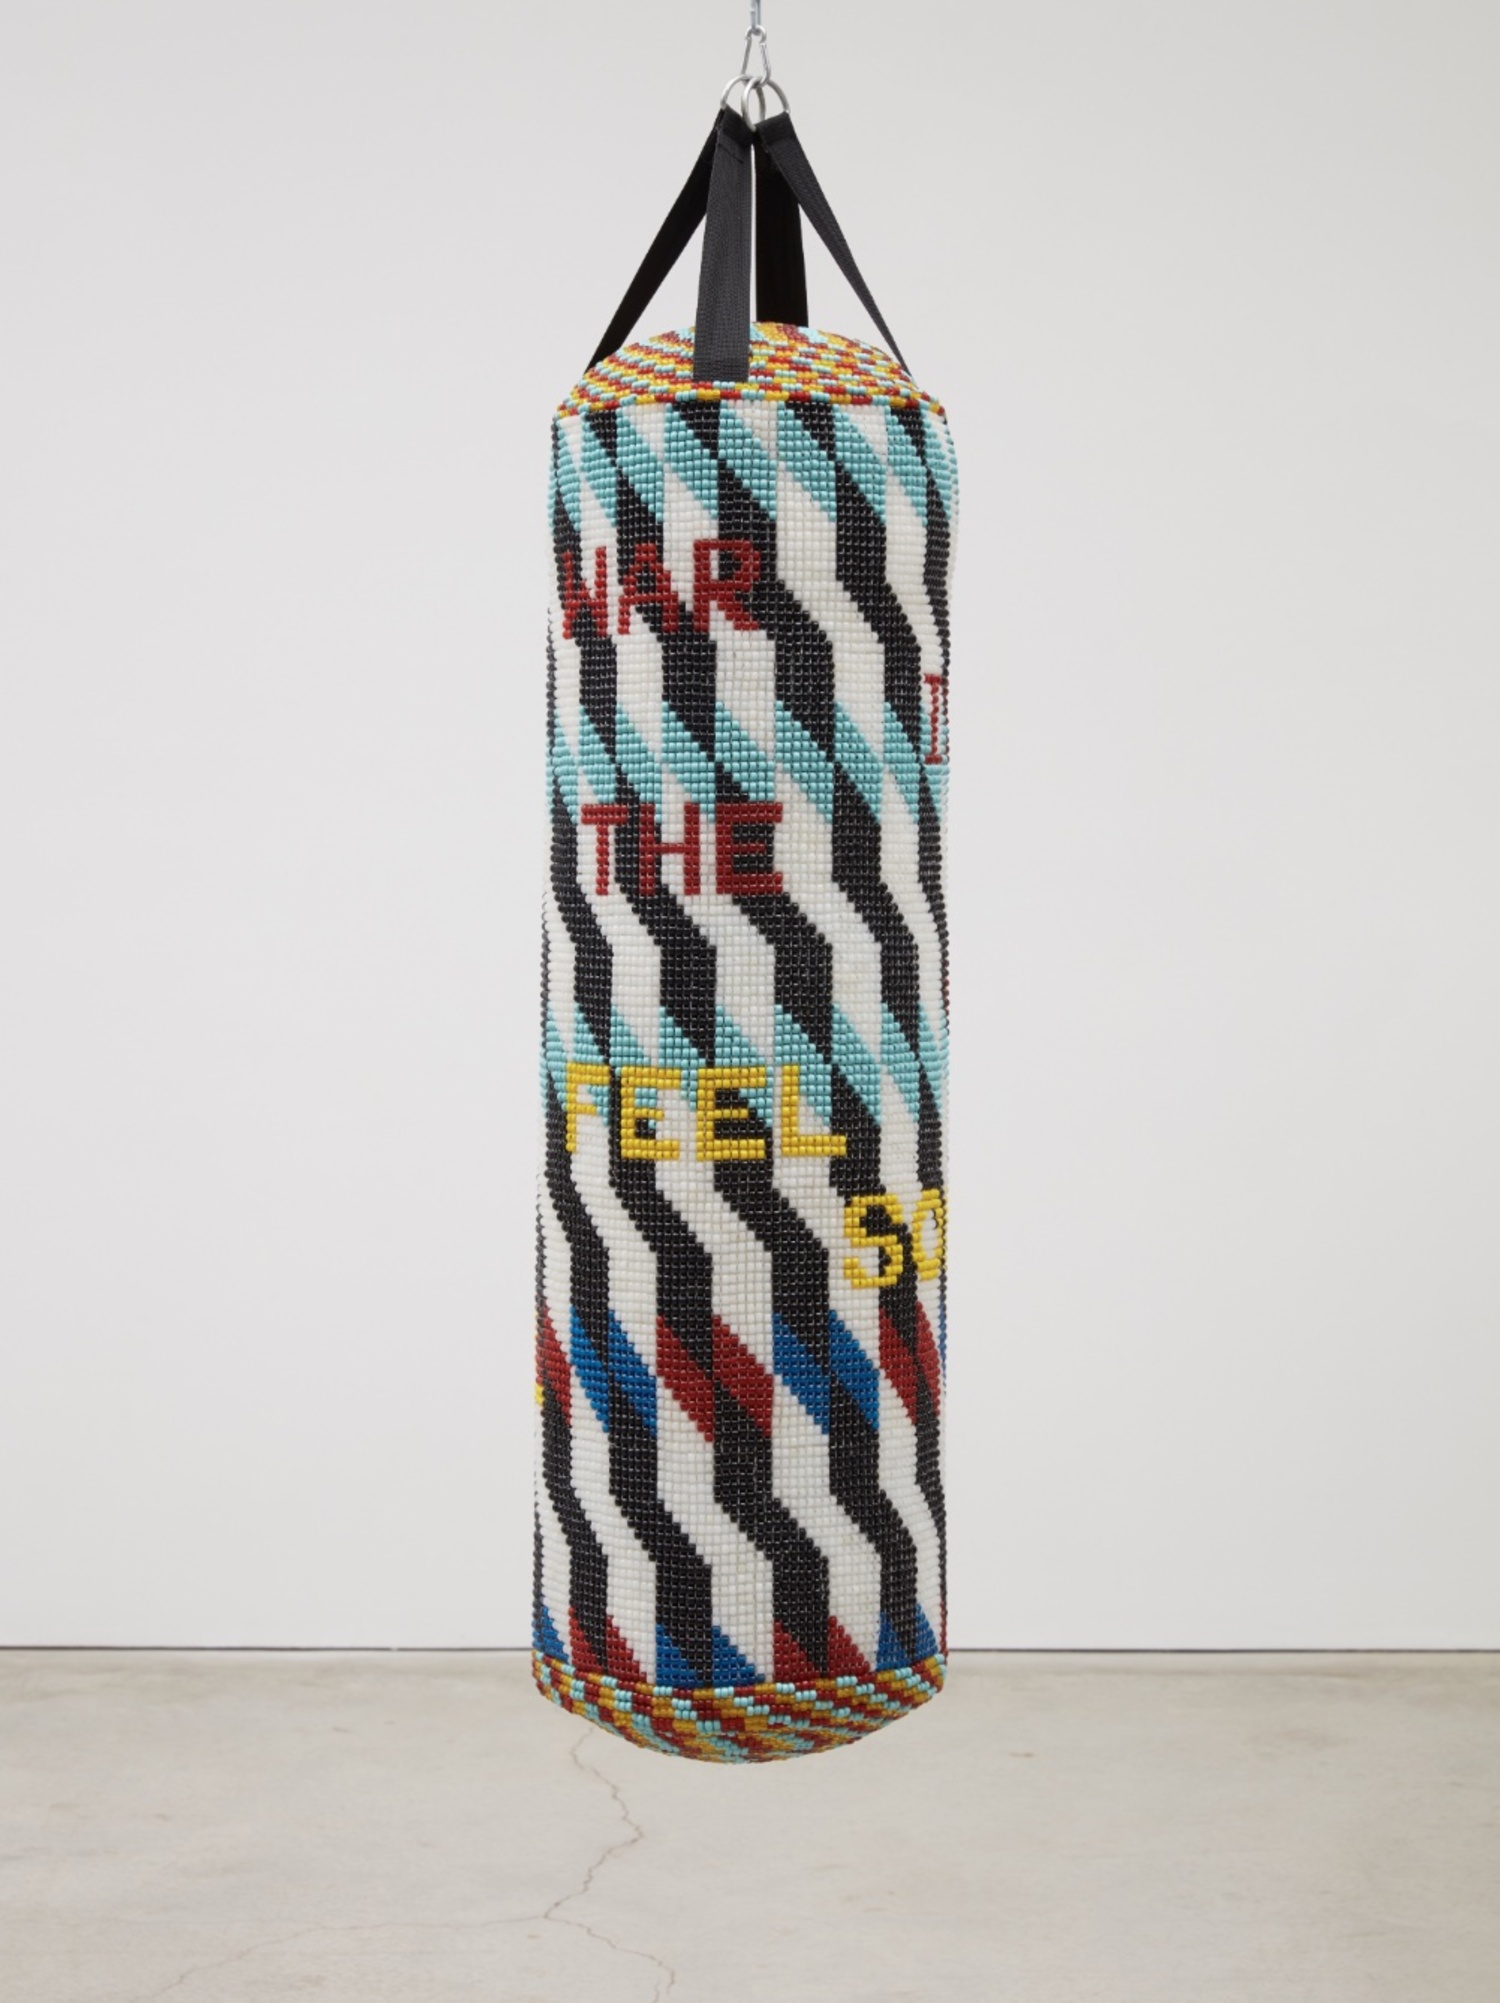 Jeffrey Gibson, “WAR IS NOT THE ANSWER FEEL SOEMTHING REAL,” 2020. Repurposed punching bag, acrylic felt, glass beads, artificial sinew, 57” x 15” x 15.” © JEFFREY GIBSON, COURTESY THE ARTIST AND COLLECTION OF BECKY GOCHMAN